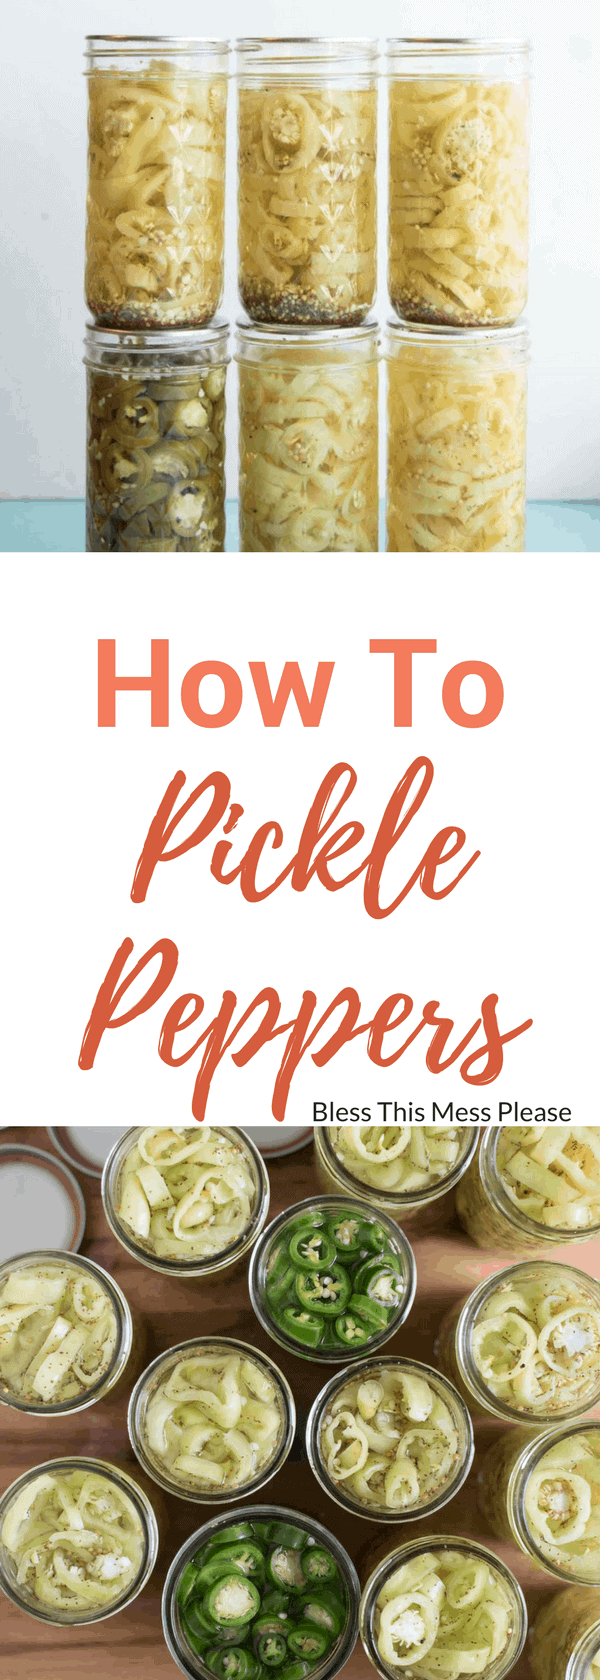 How to Pickle Peppers